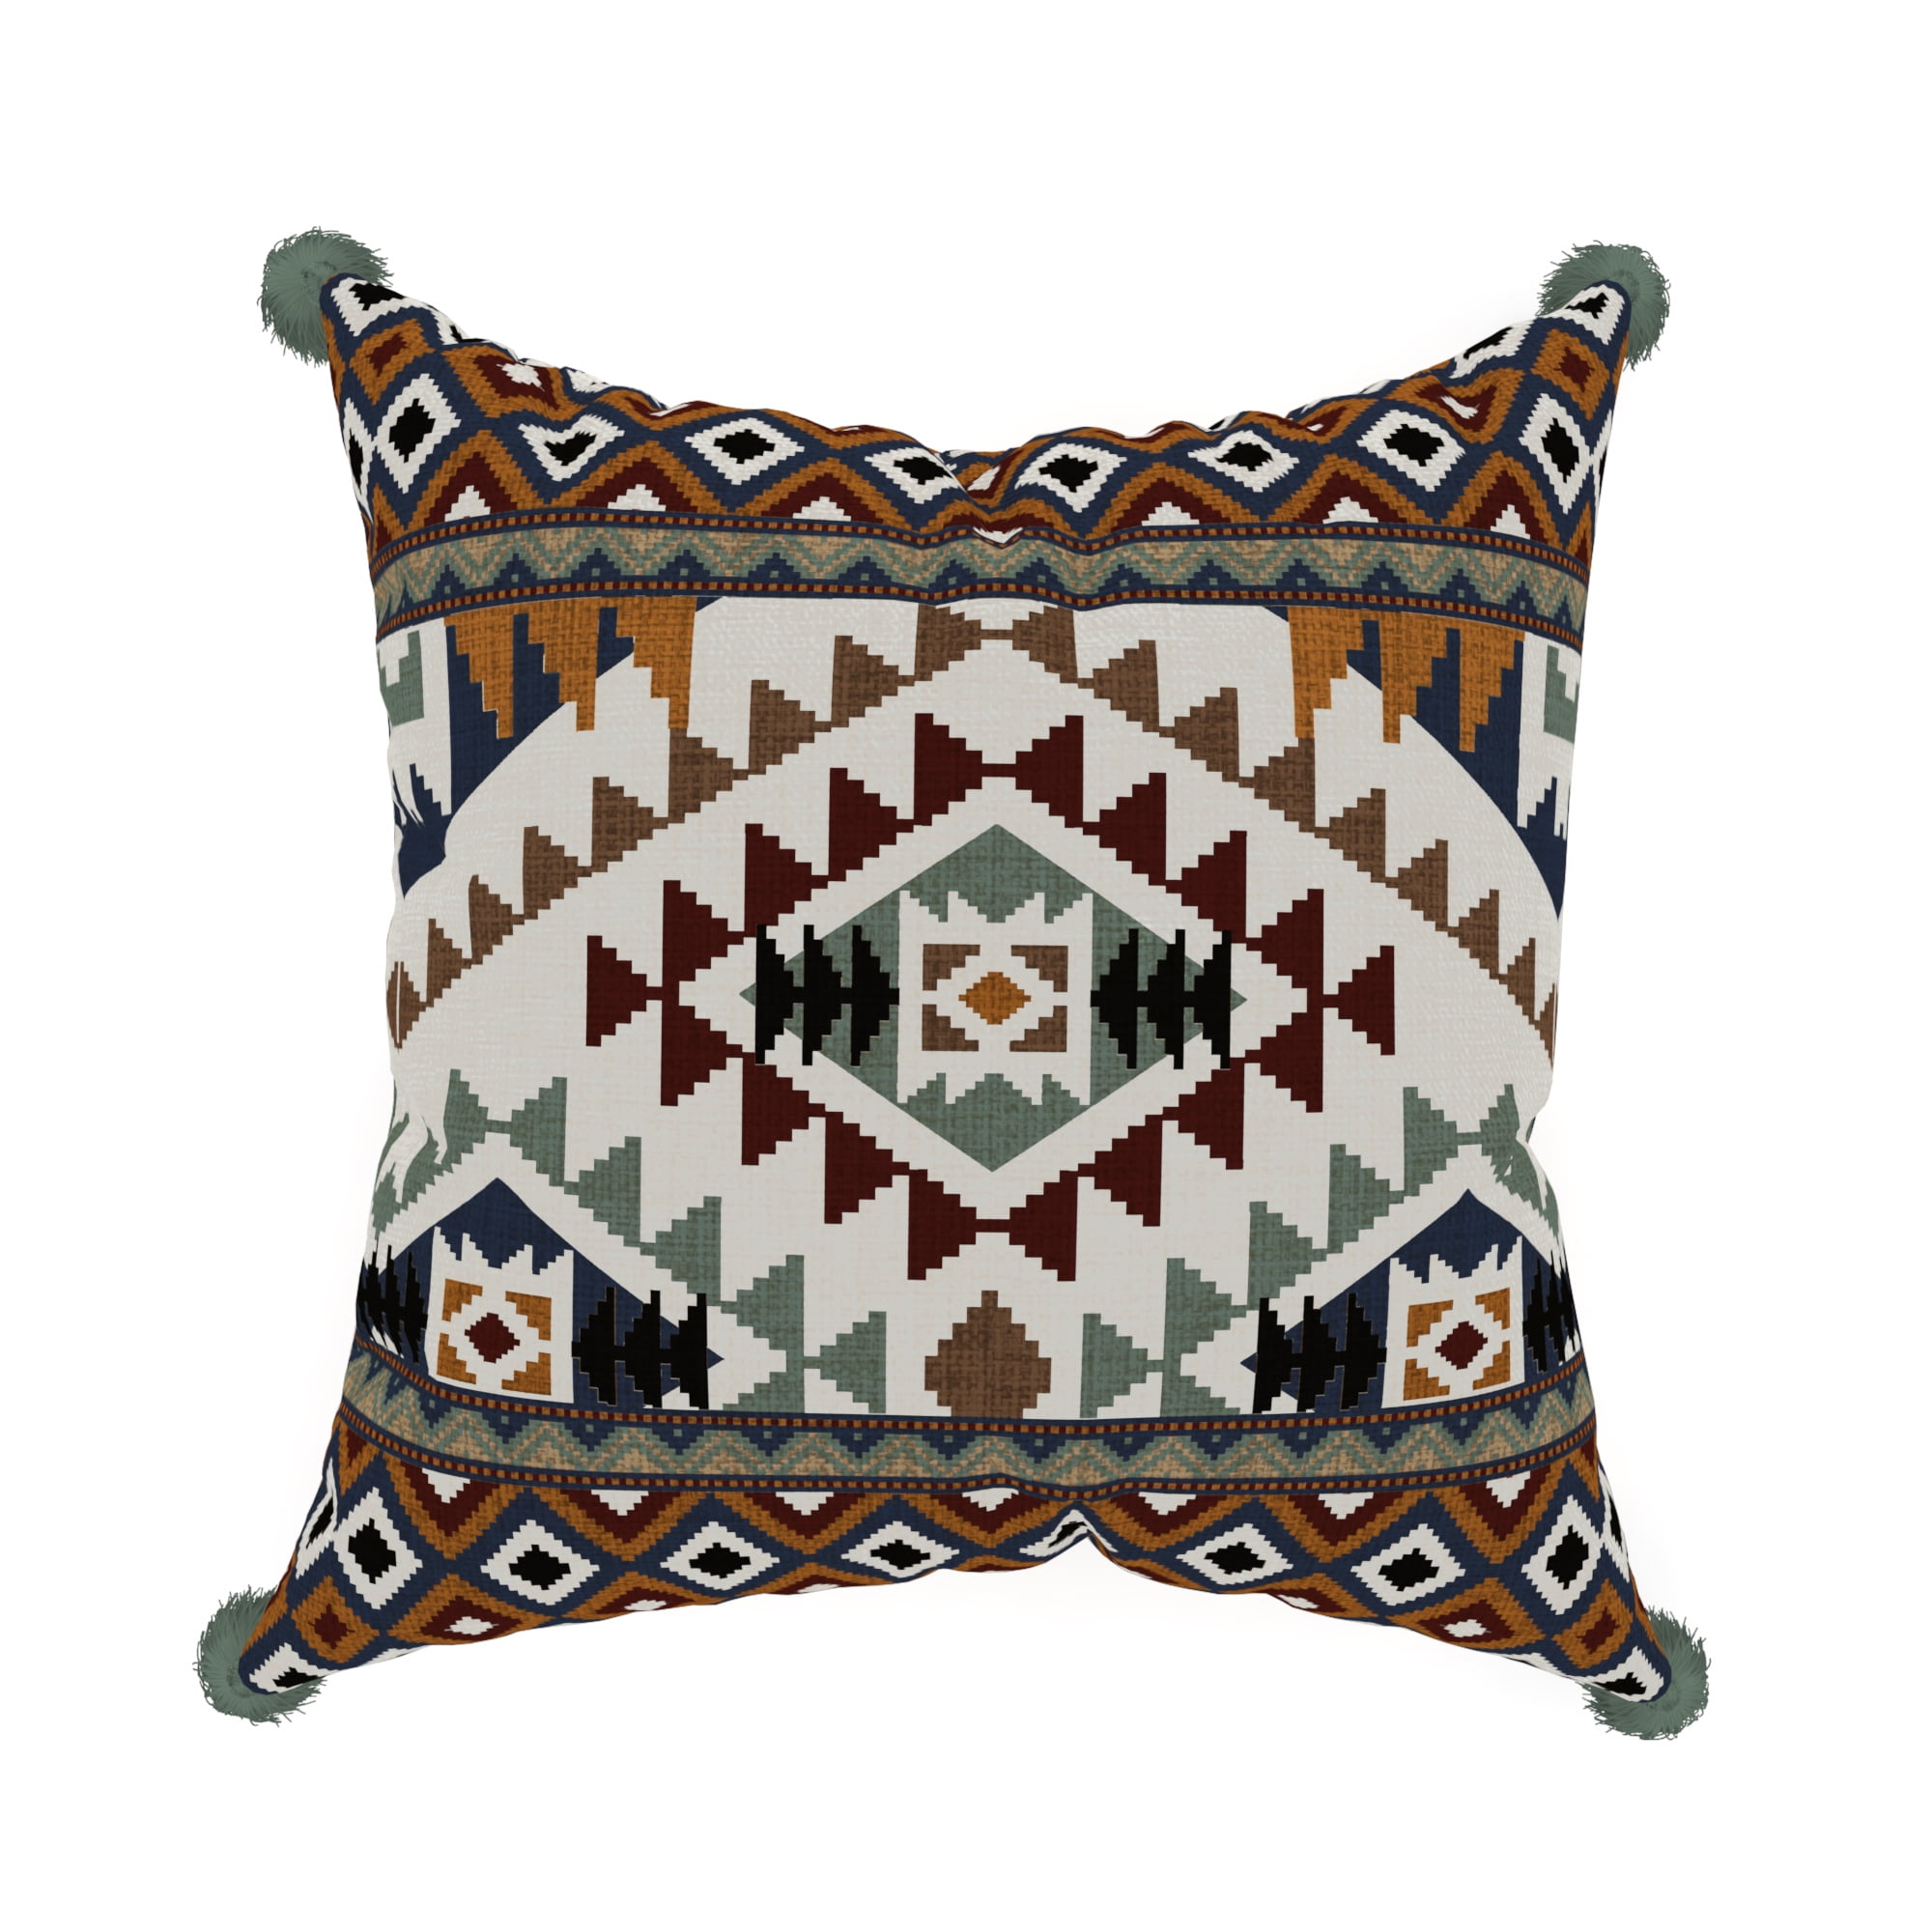 Black White Tribal Throw Pillow with Zipper Southwest Charcoal Cushion Cover for Sofa Trendy Boho Decor for Living Room and Bedroom